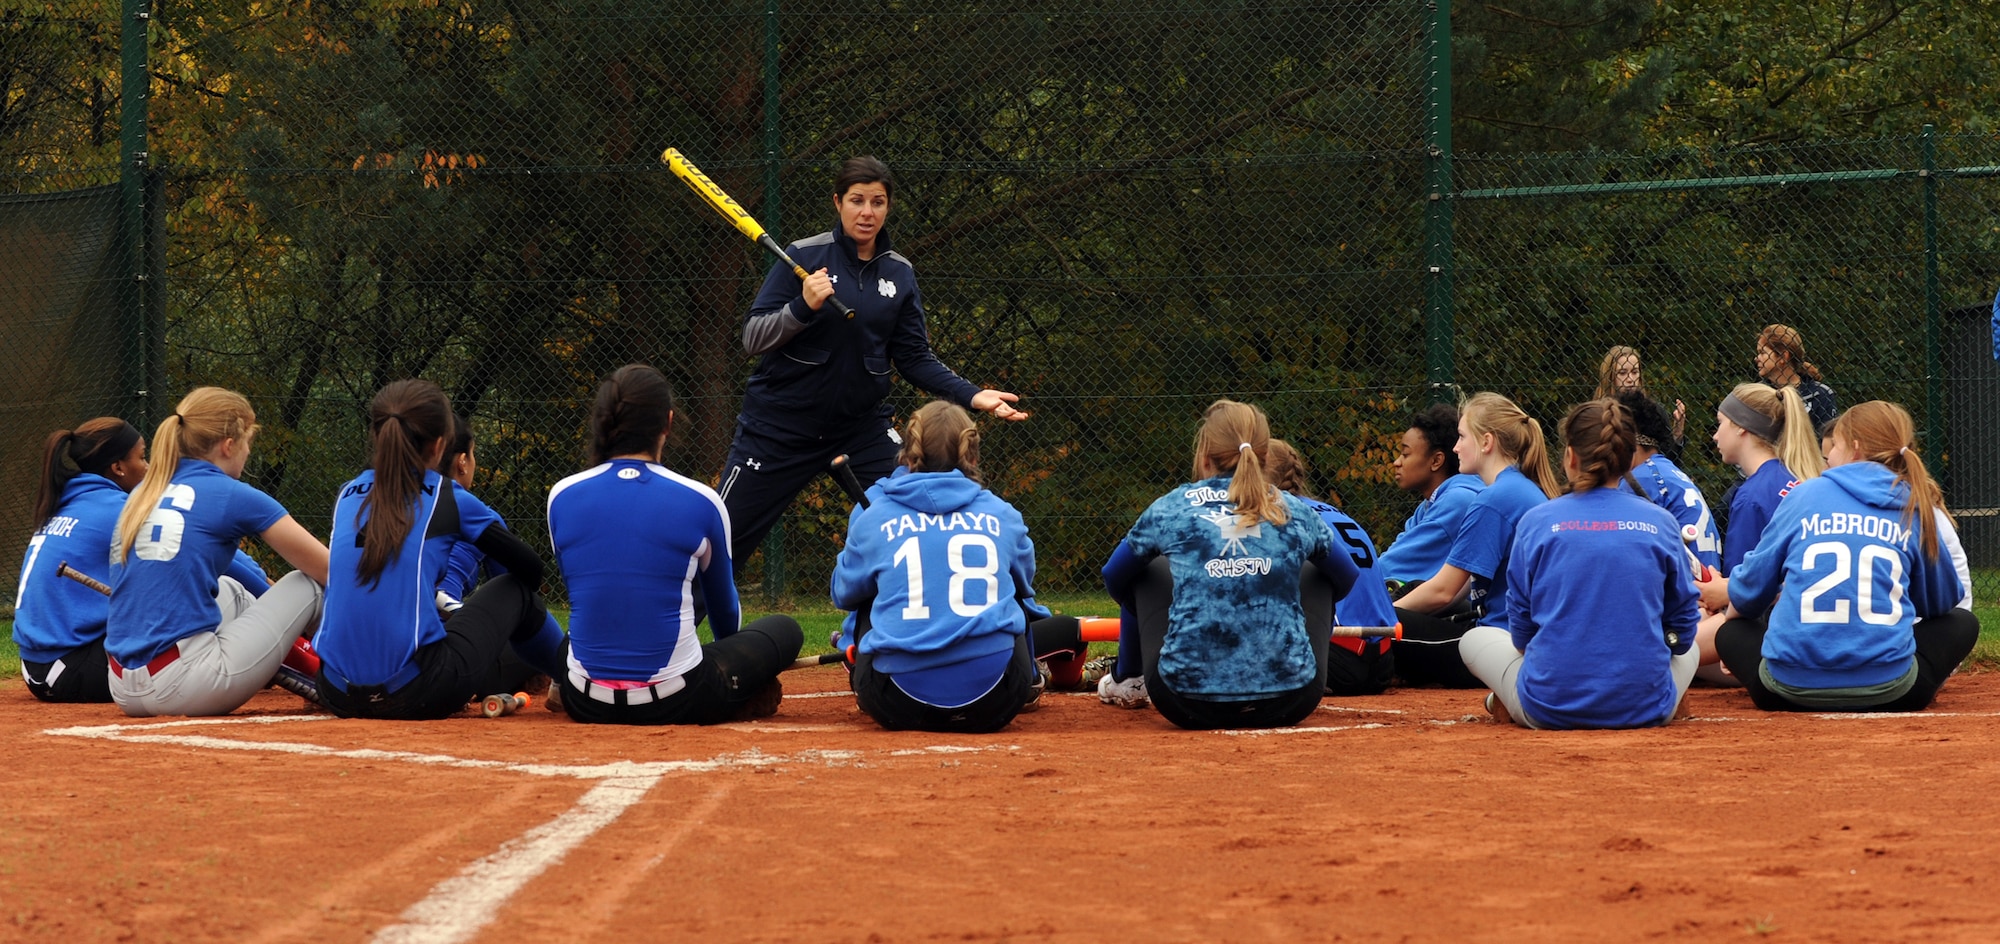 Lizzy Ristano, University of Notre Dame associate softball coach, gives instructions to members of the Ramstein High School Royals varsity softball team Oct. 21, 2015, at Ramstein Air Base, Germany. The Notre Dame coaching staff and players held an instructional softball clinic, a scrimmage and a question and answer session during their visit to the base. (U.S. Air Force photo/Staff Sgt. Sharida Jackson)